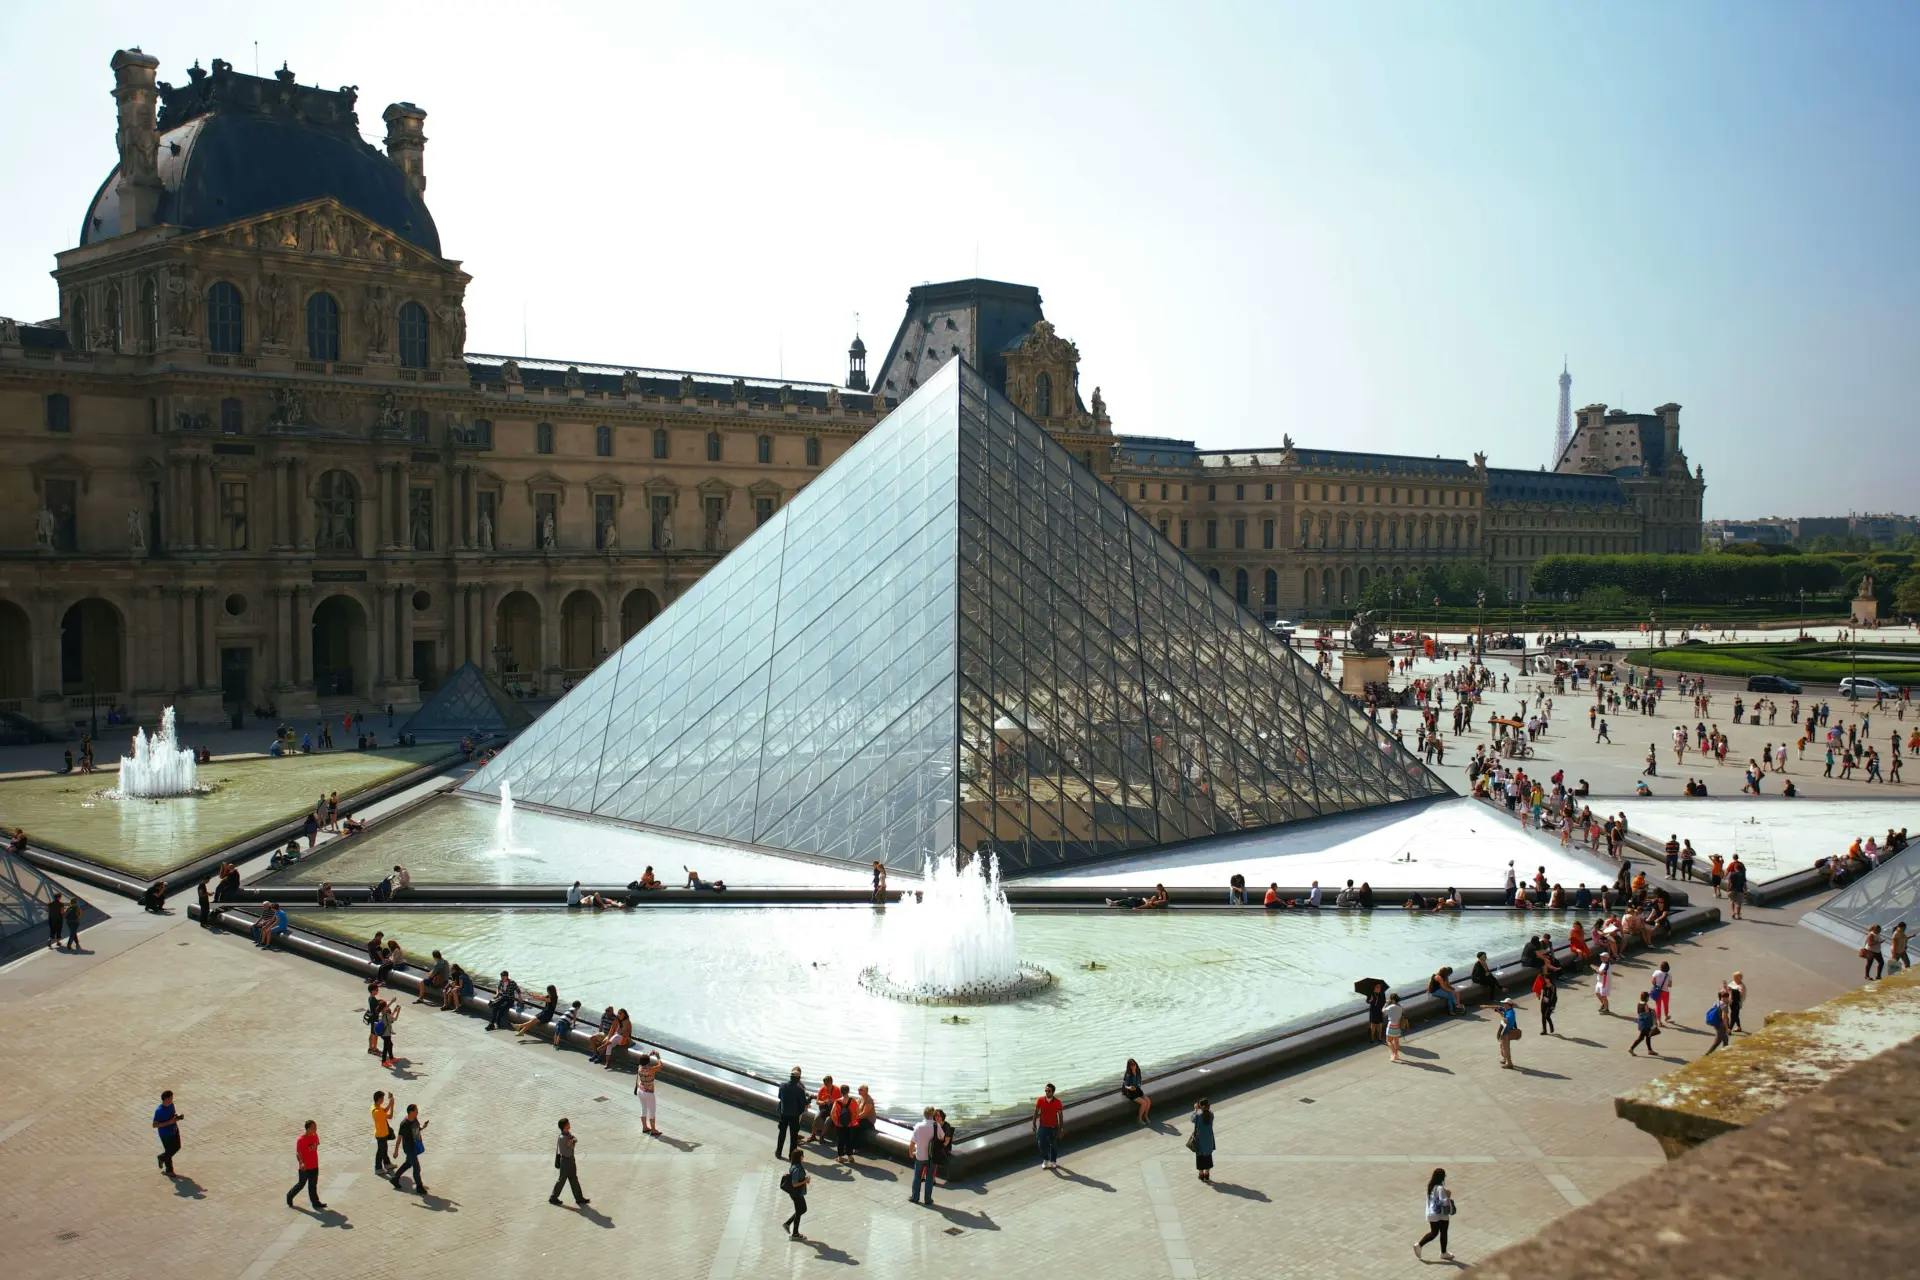 An image of the Louvre in France